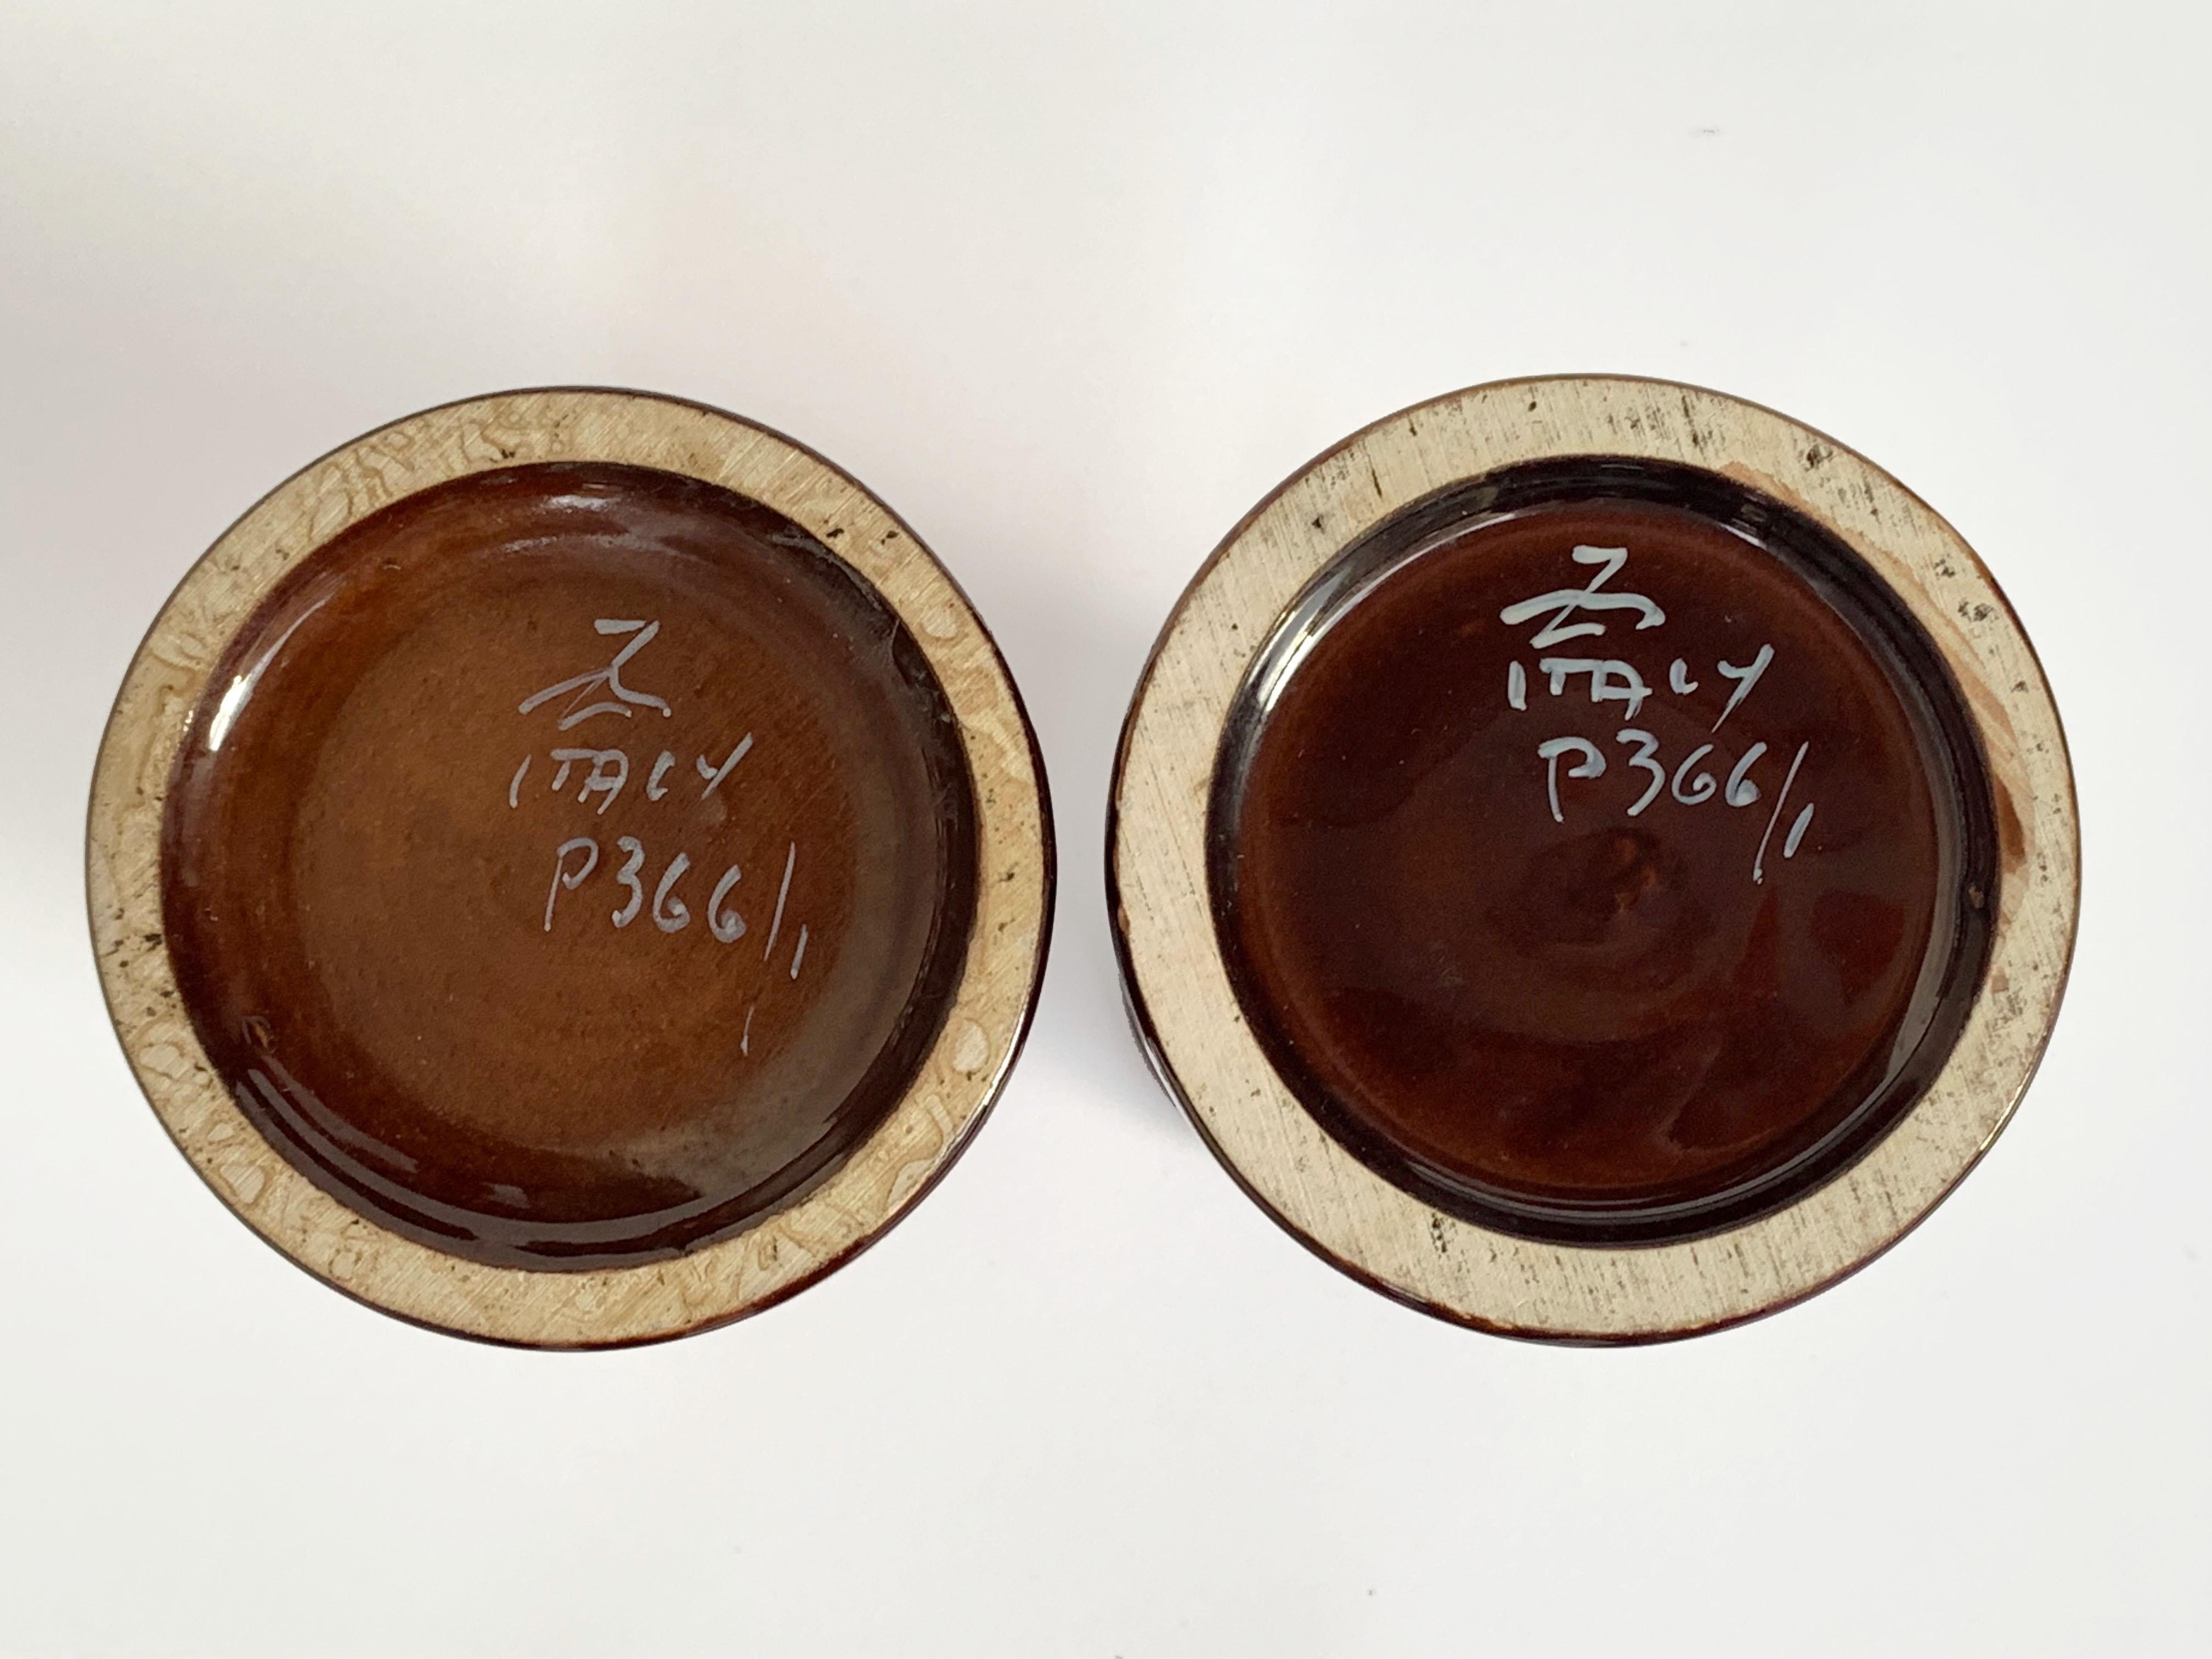 20th Century Pair of Enamelled Ceramic Vases, Brown, Candleholder, Signed Italy, 1970s bamboo